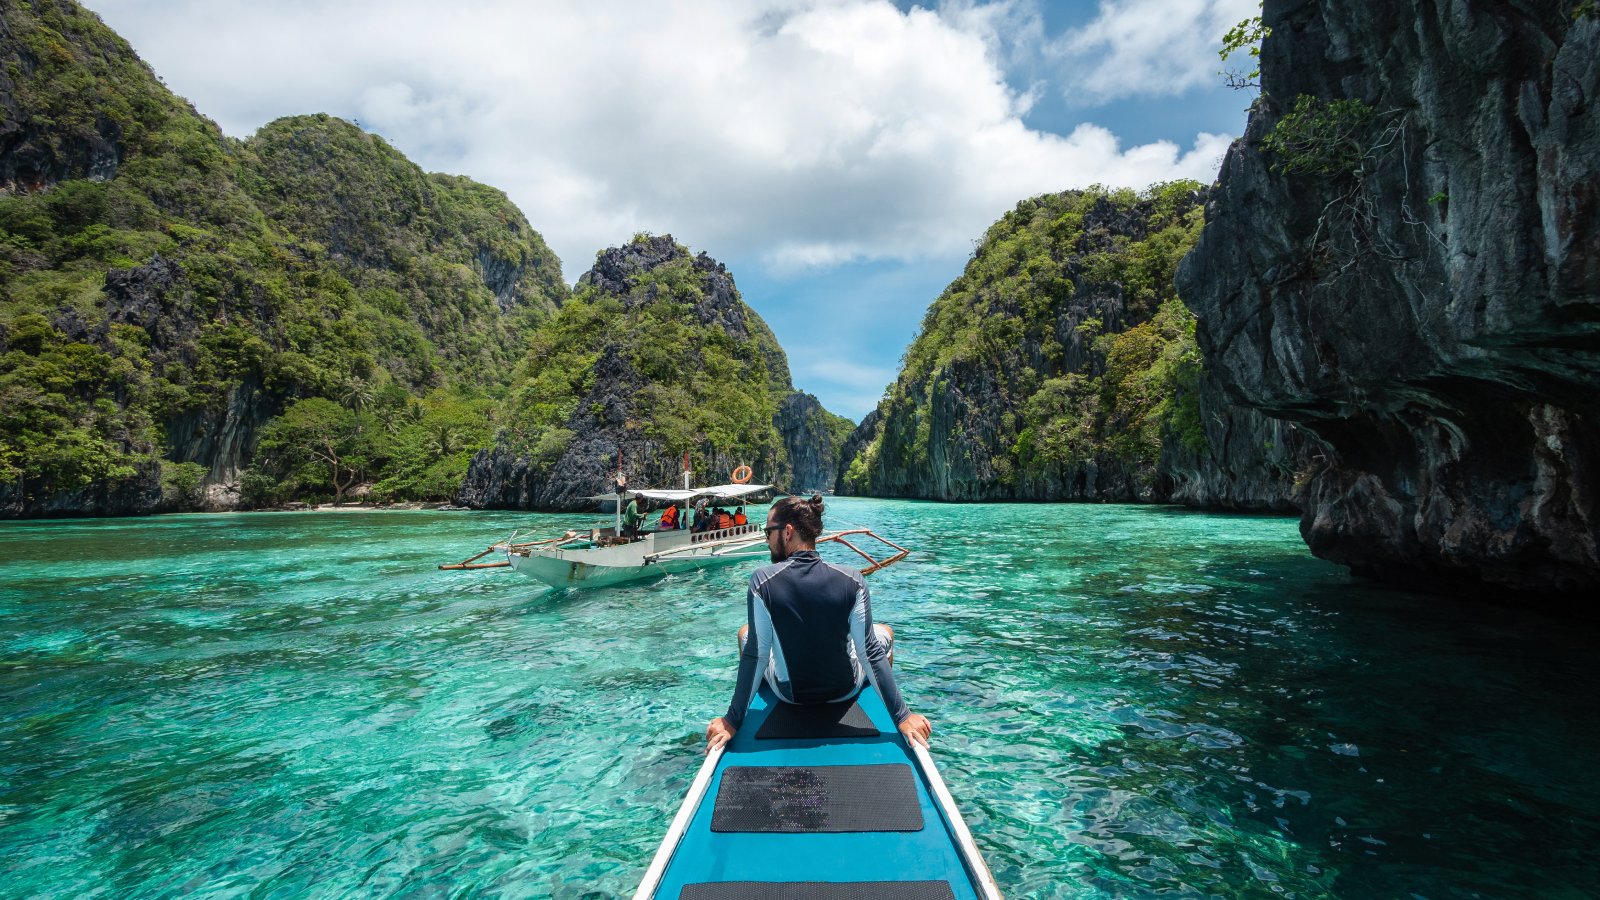 Image Credit: Shutterstock / R.M. Nunes <p>Palawan’s stunning landscapes are matched by its commitment to sustainable tourism. Affordable eco-resorts and community-led tours ensure that your visit supports local livelihoods while preserving the natural beauty.</p>